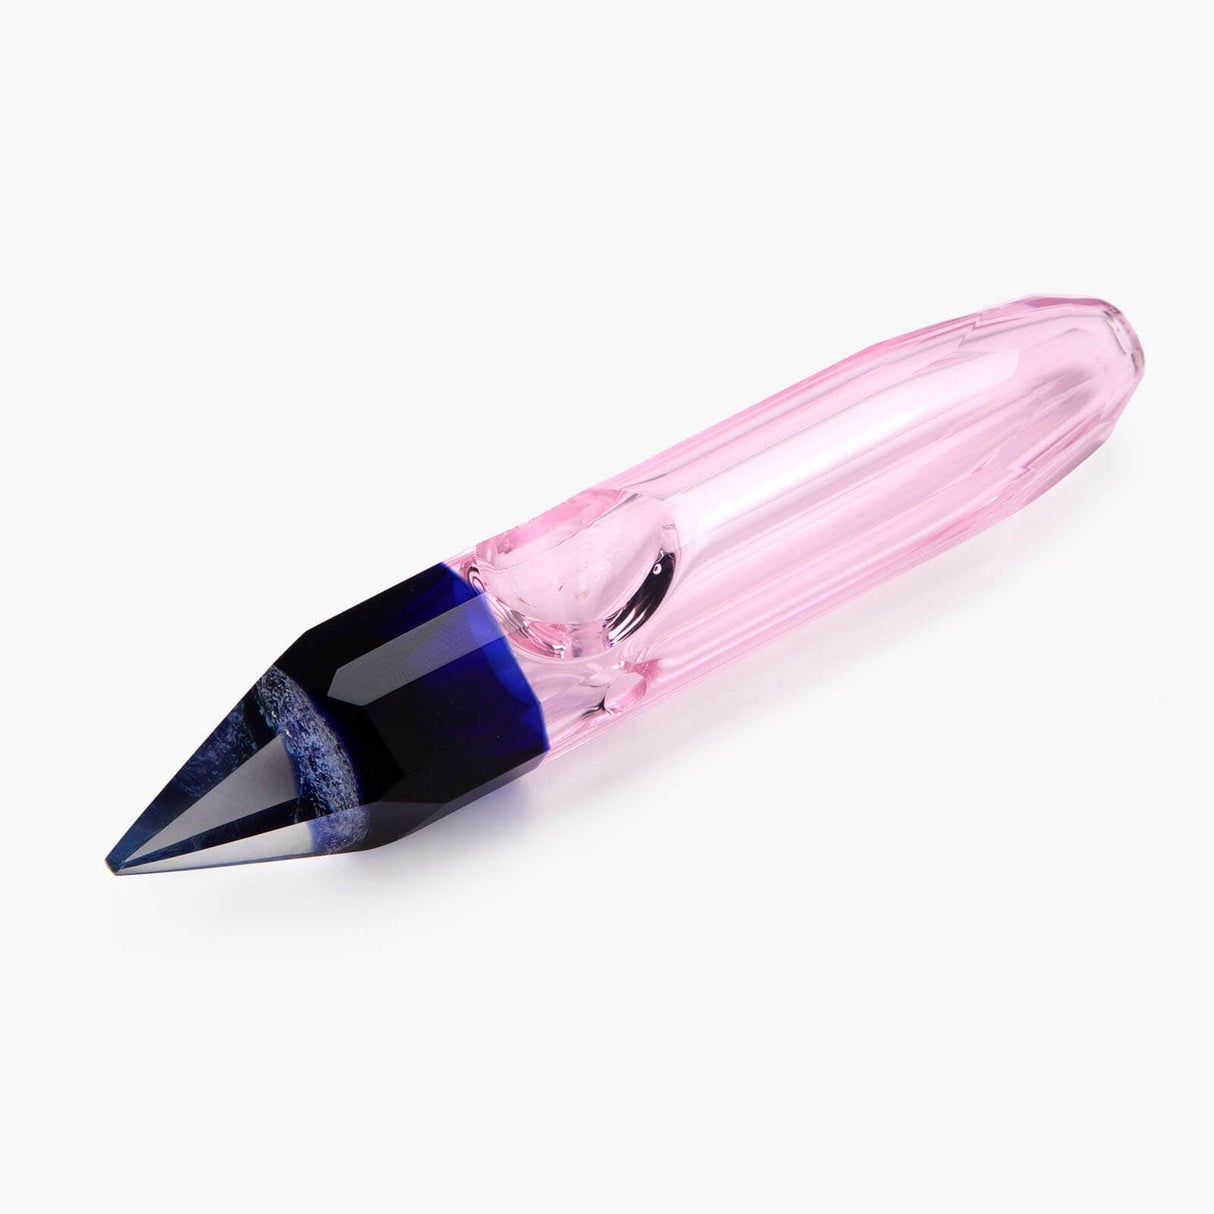 PILOT DIARY Crystal Hand Pipe in Pink with Deep Bowl - Top Angle View